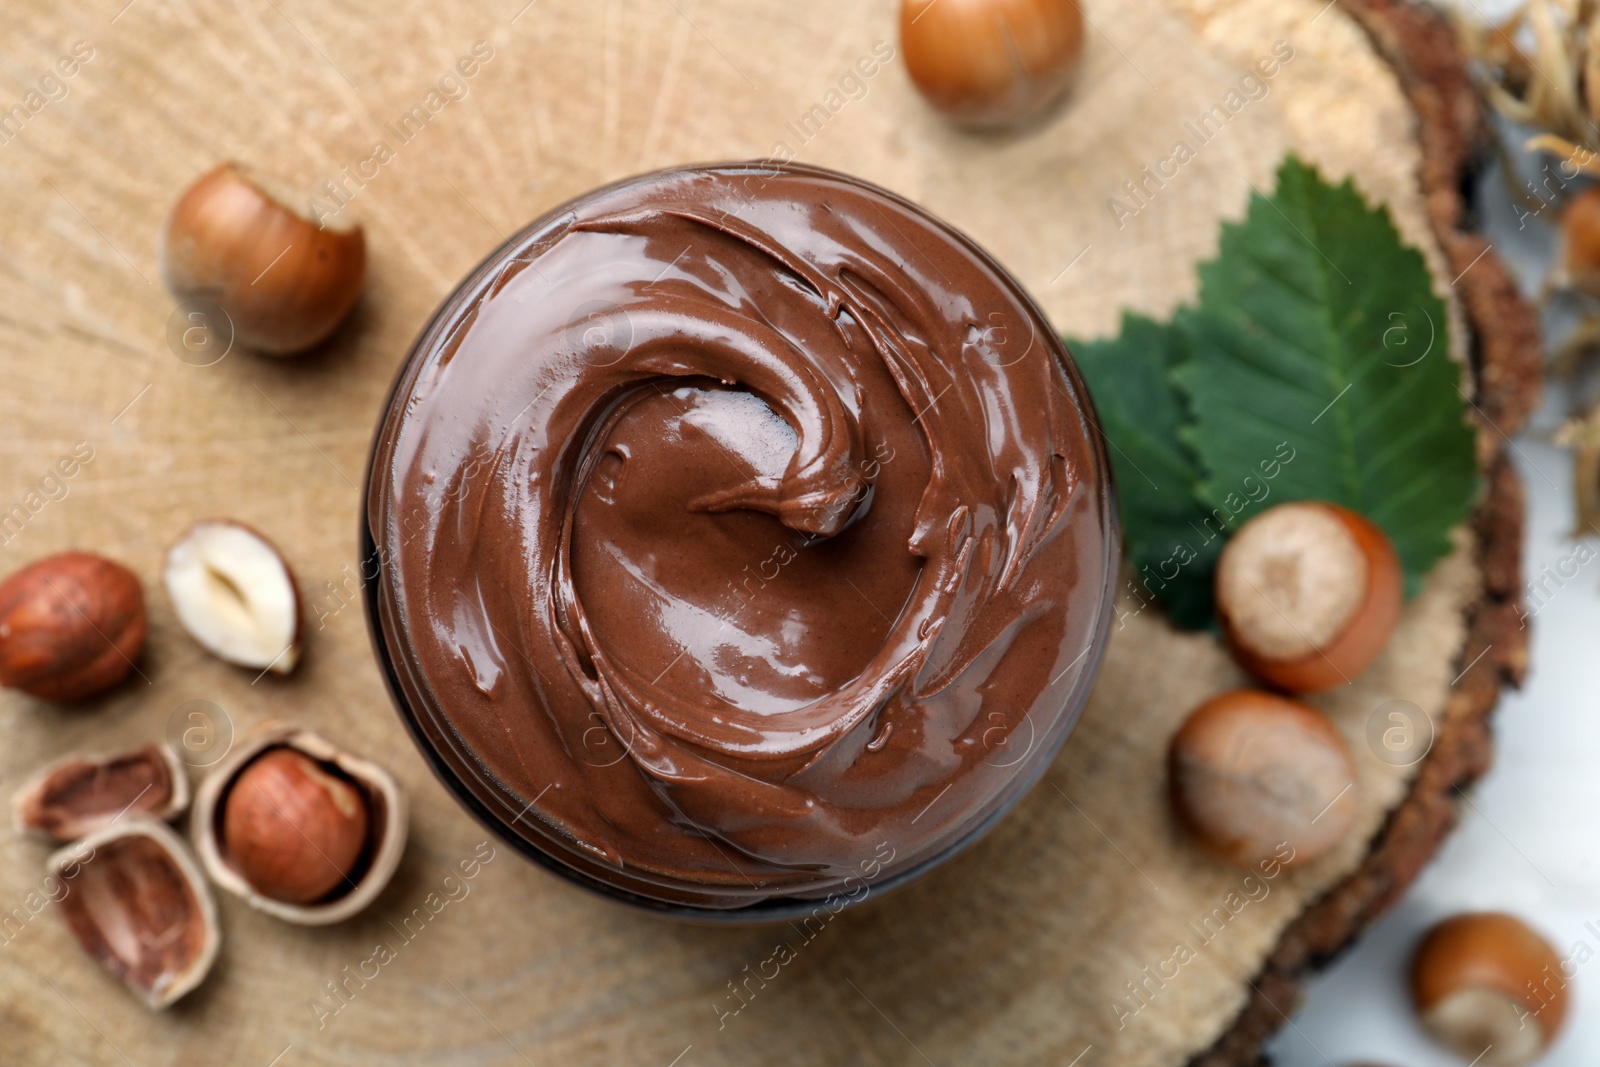 Photo of Jar with tasty chocolate spread and hazelnuts on wooden board, flat lay